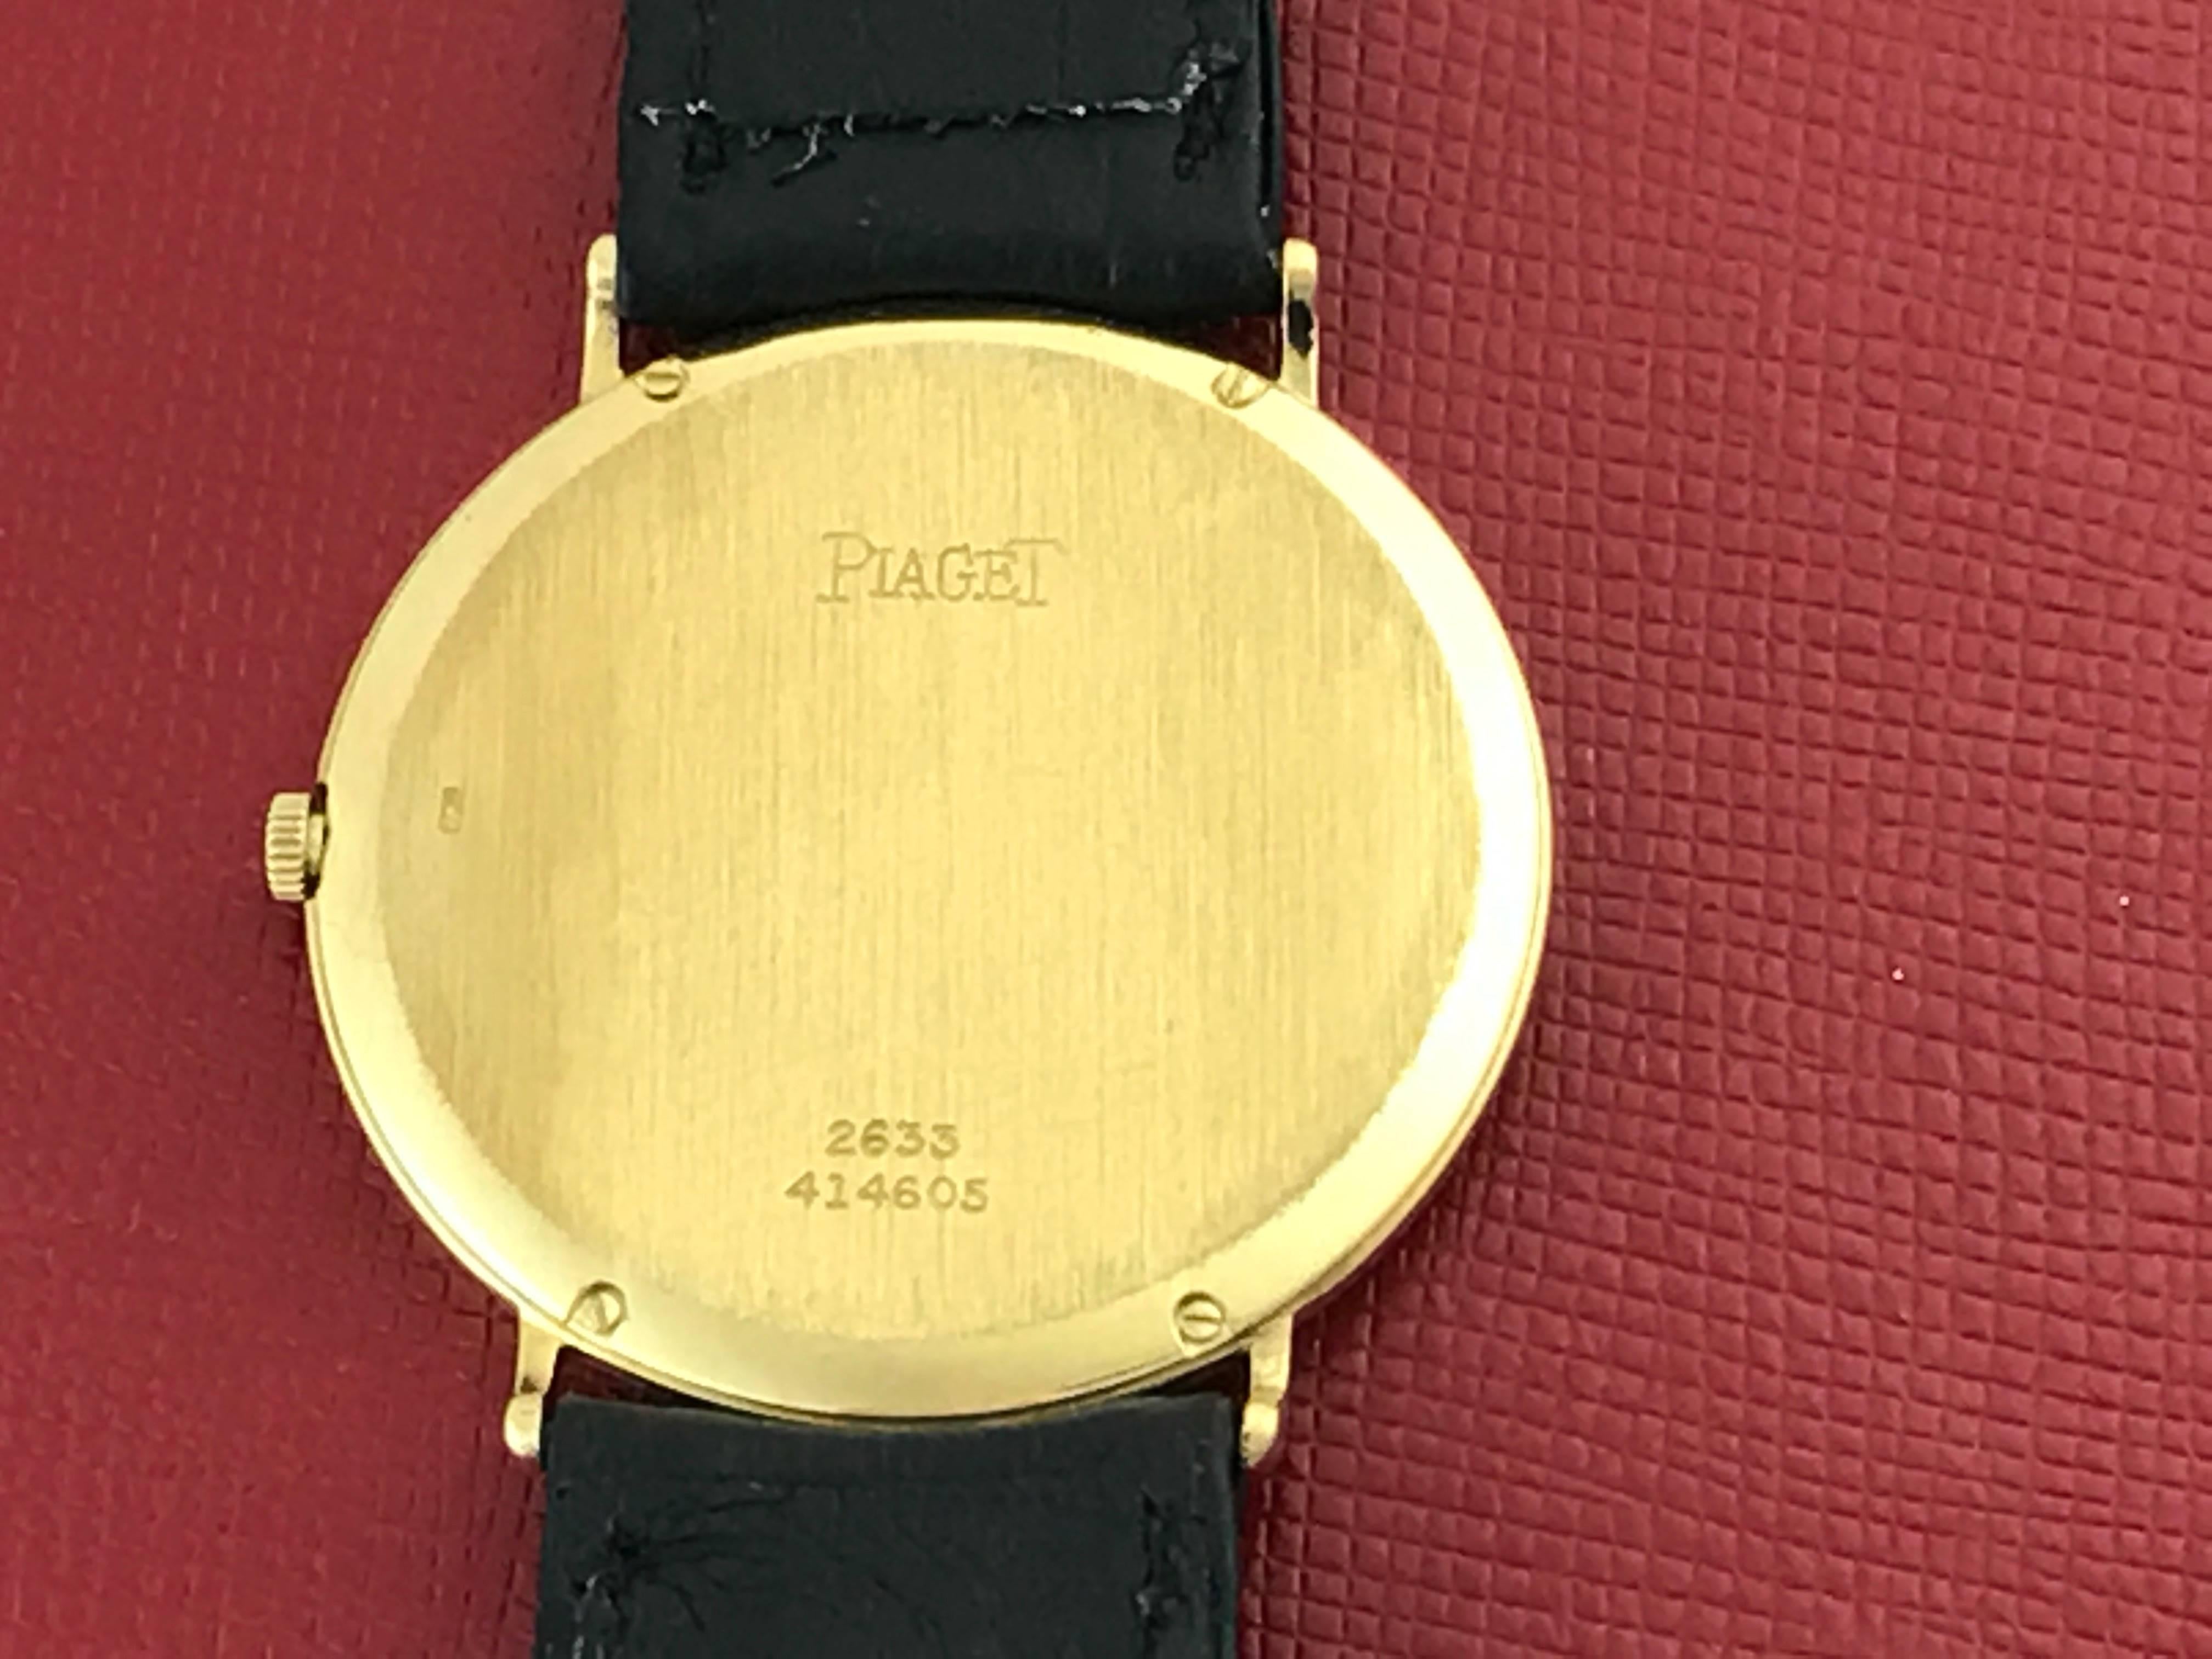 Contemporary Piaget 18k Yellow Gold Manual Wristwatch with Black Strap